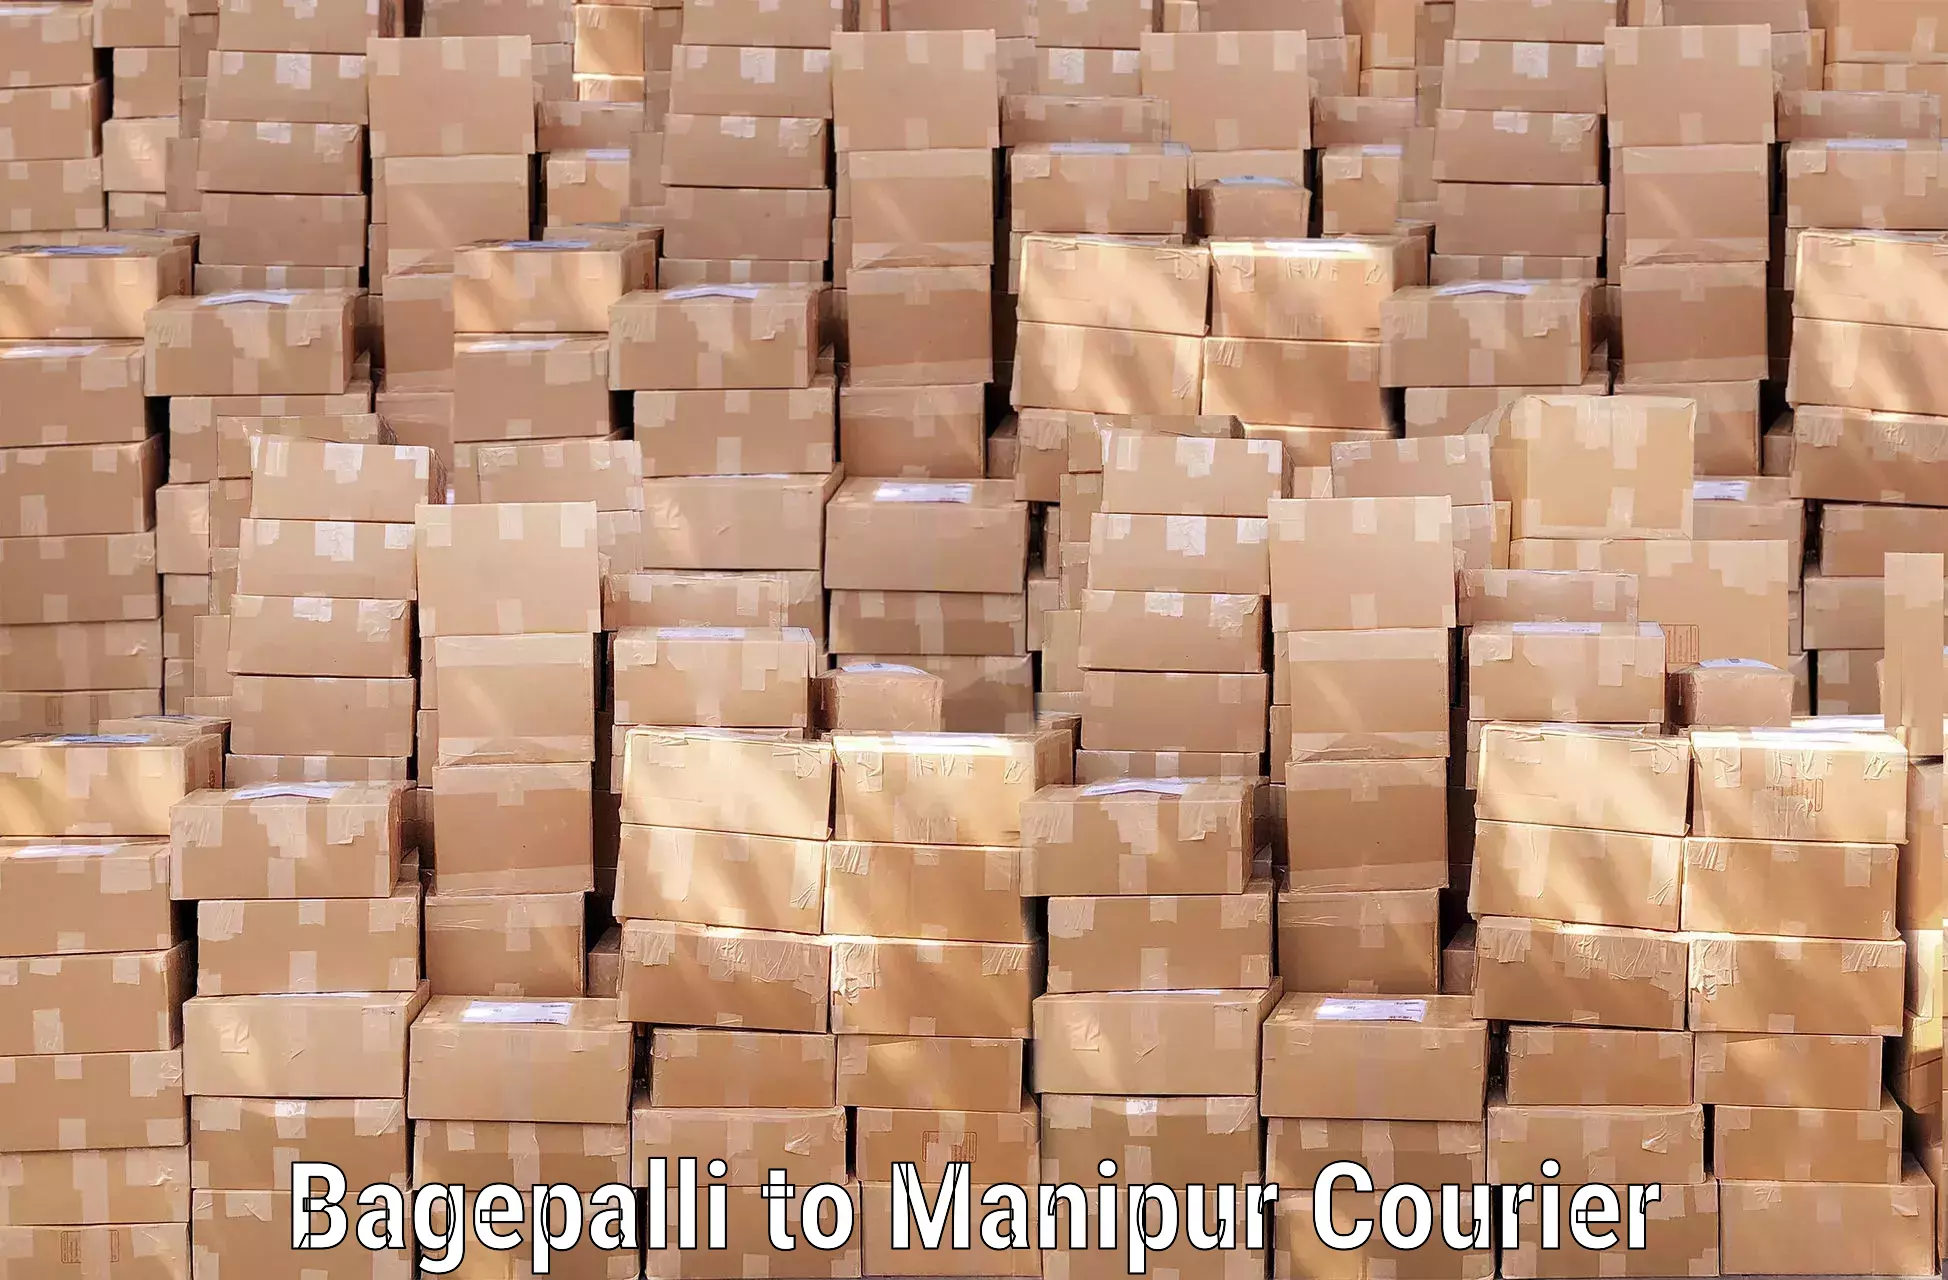 Baggage delivery scheduling Bagepalli to Manipur